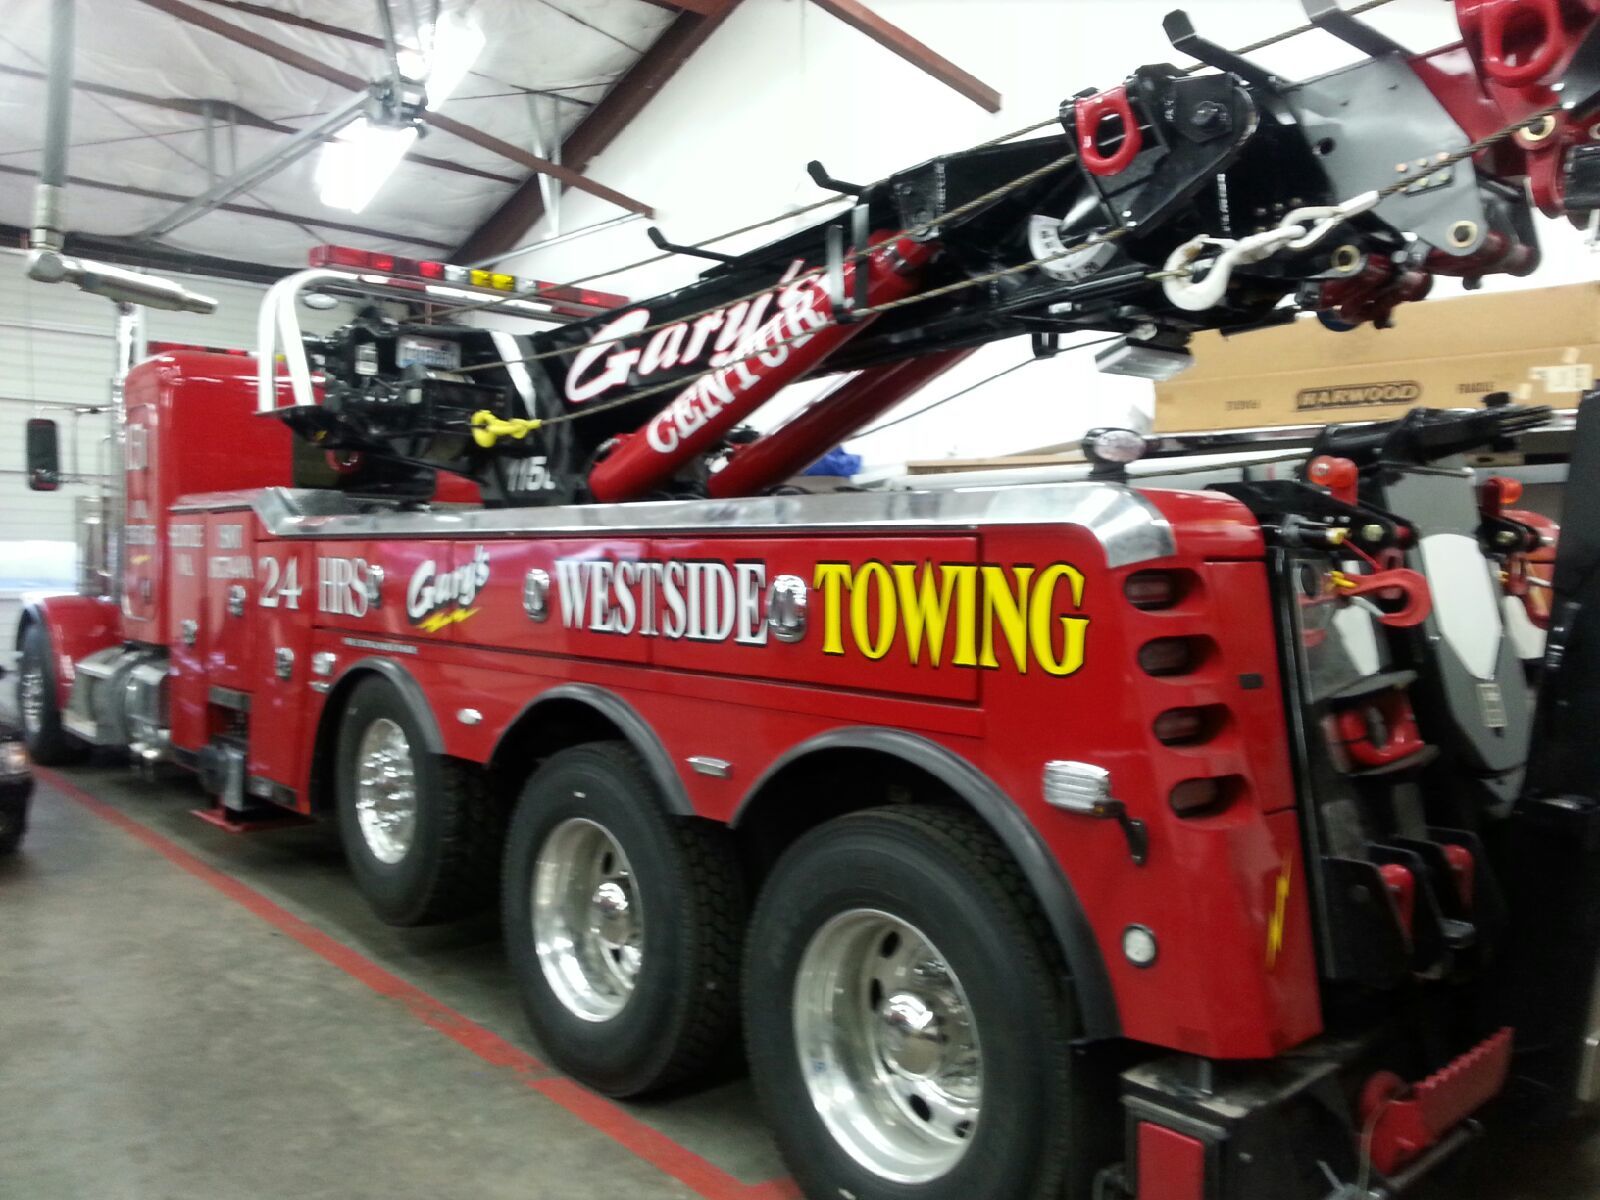 Gary's Westside Towing Photo